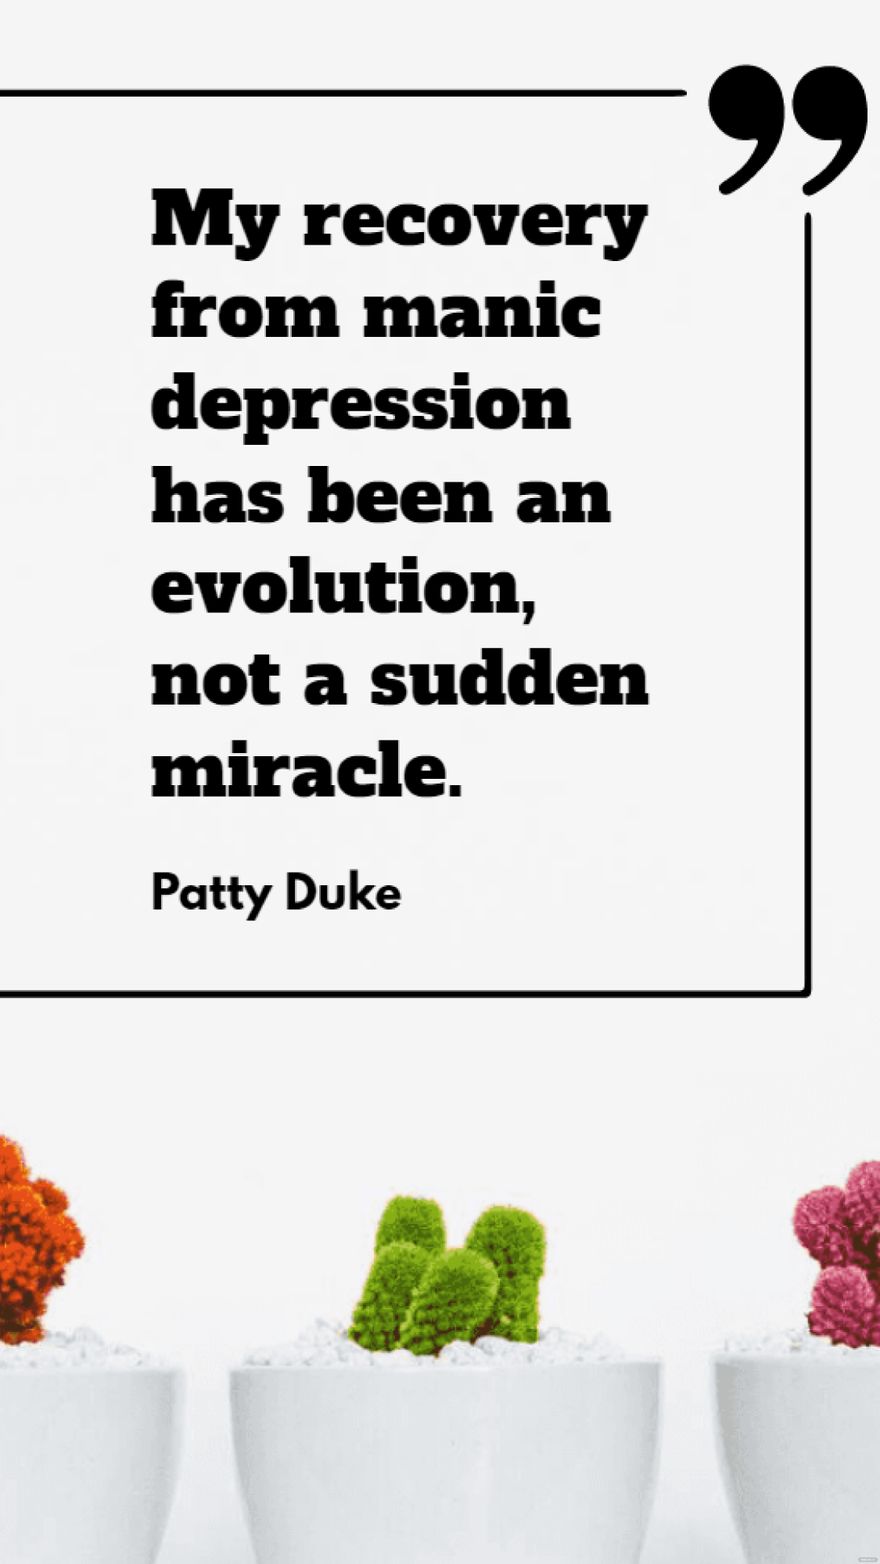 Patty Duke - My recovery from manic depression has been an evolution, not a sudden miracle.